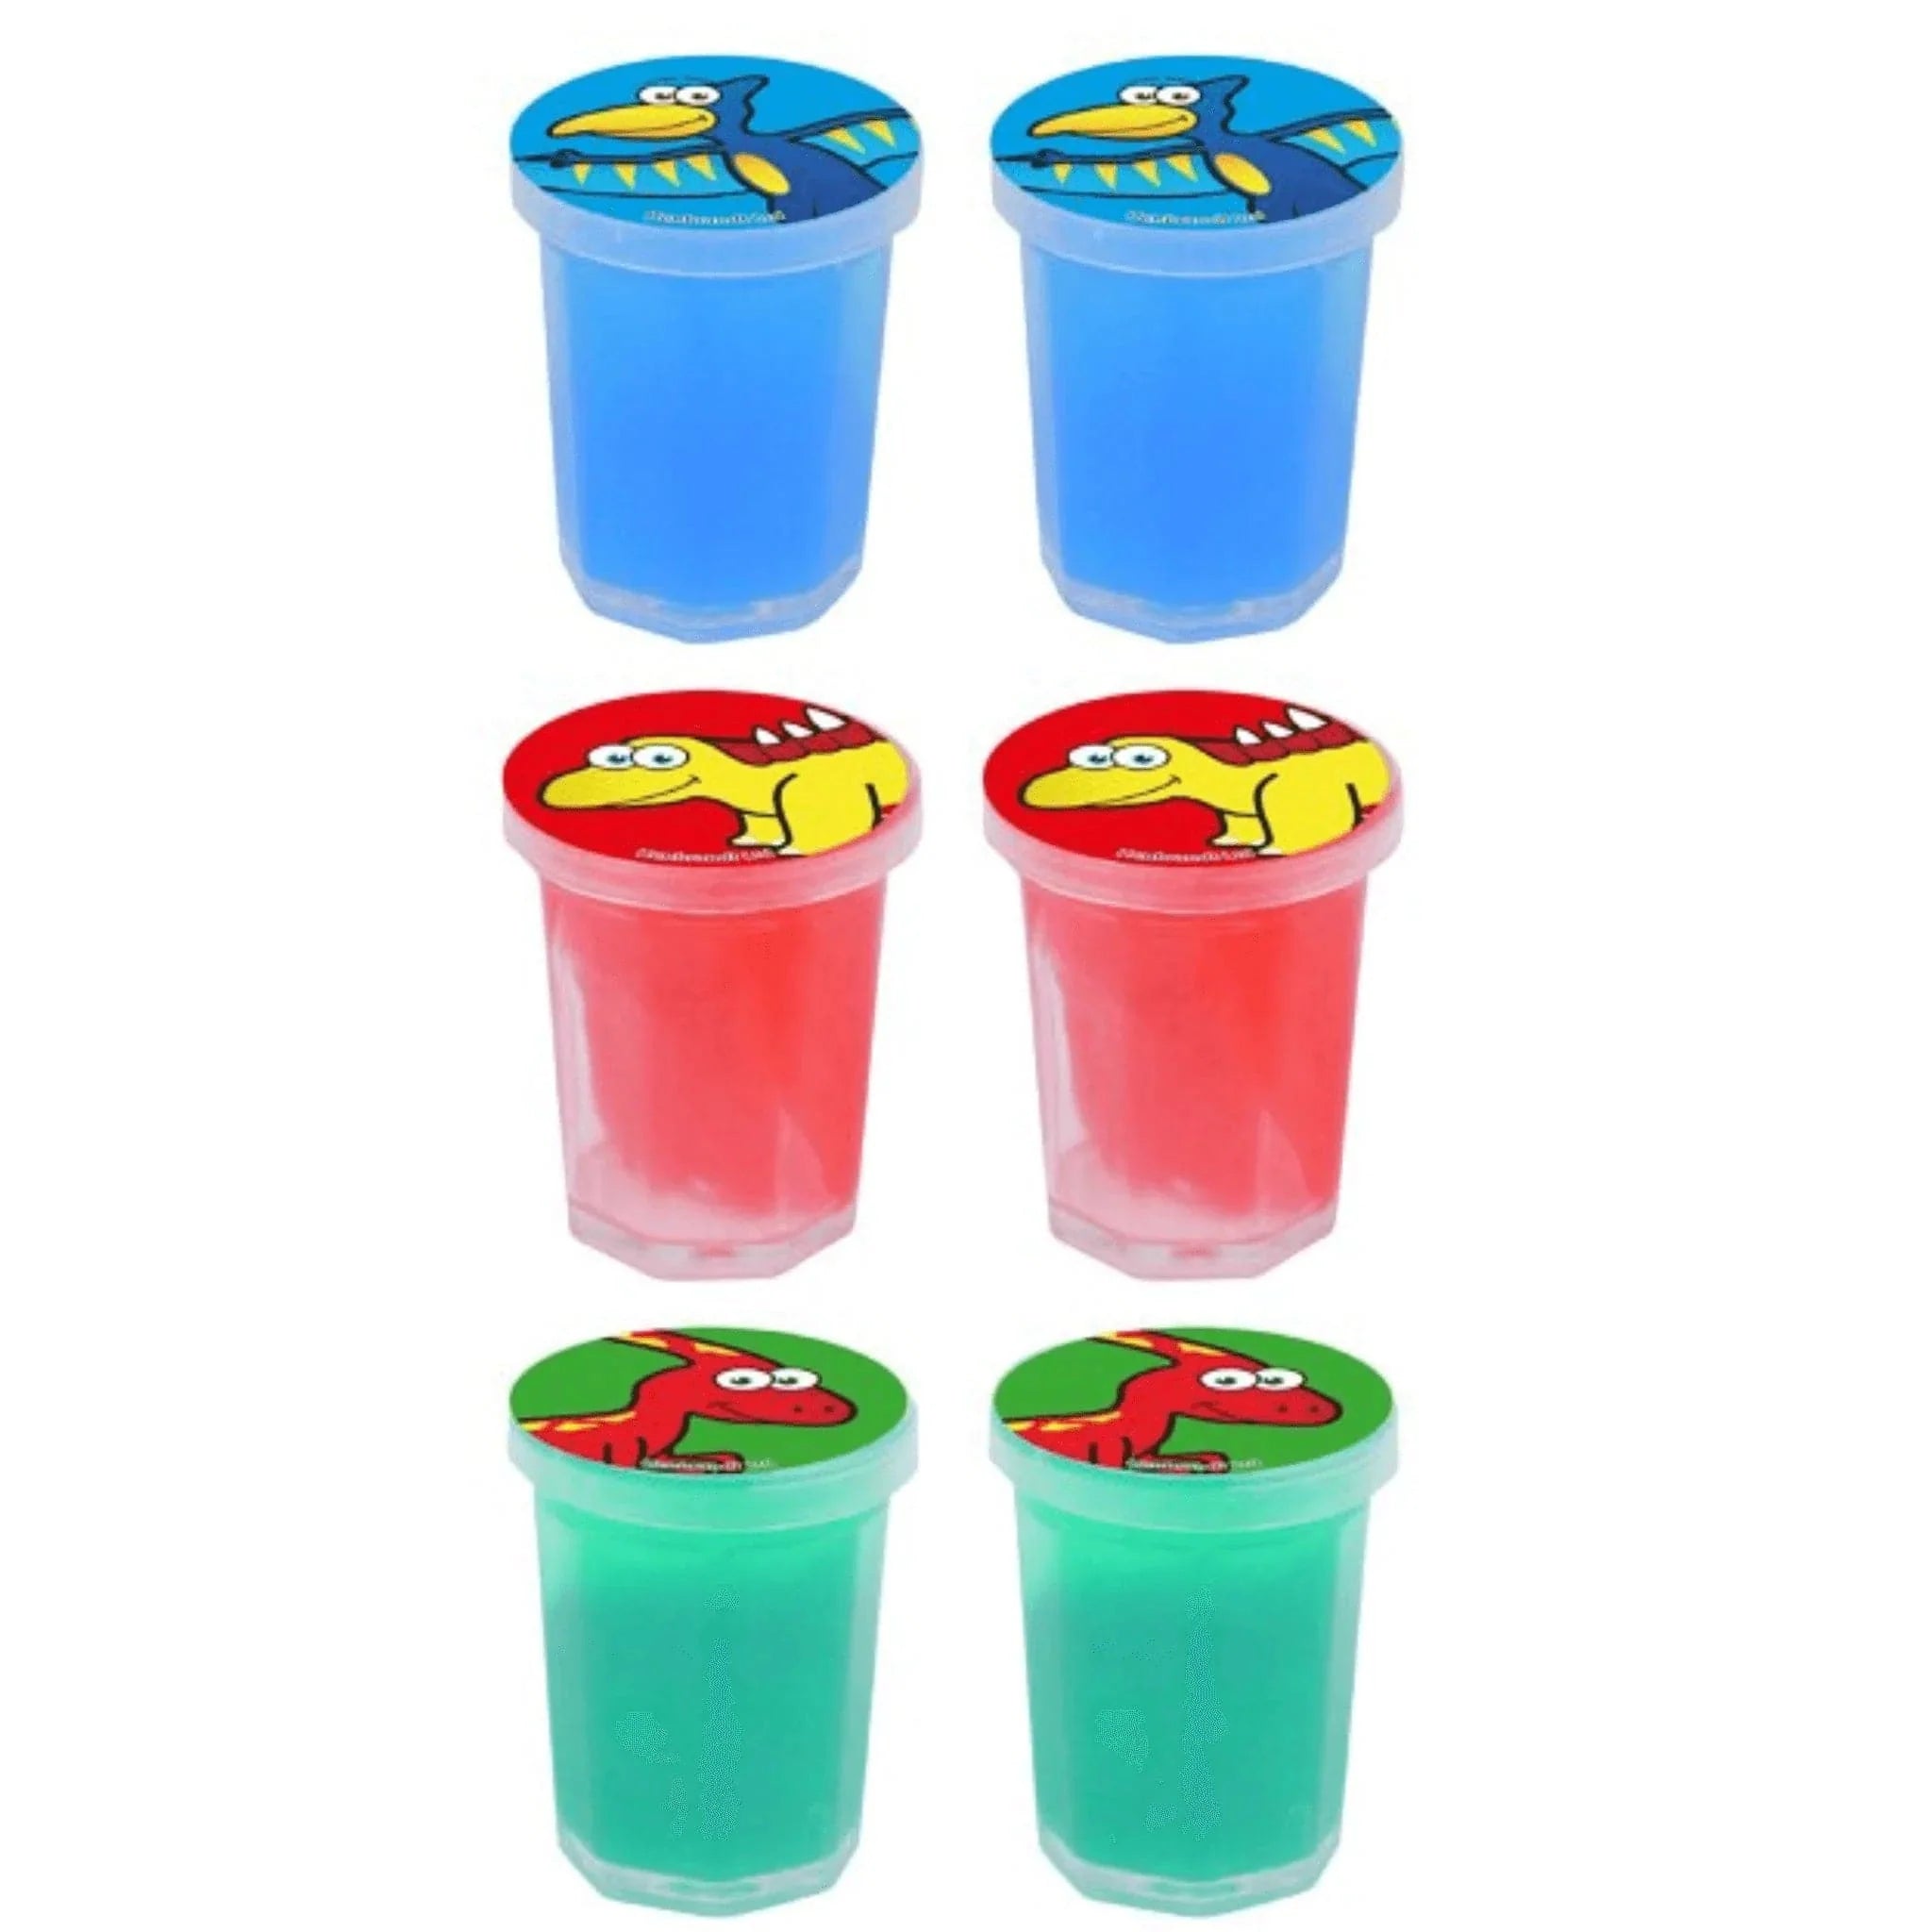 6 Pack Of Dinosaur Mini Slime Tubs - Kids Party Craft